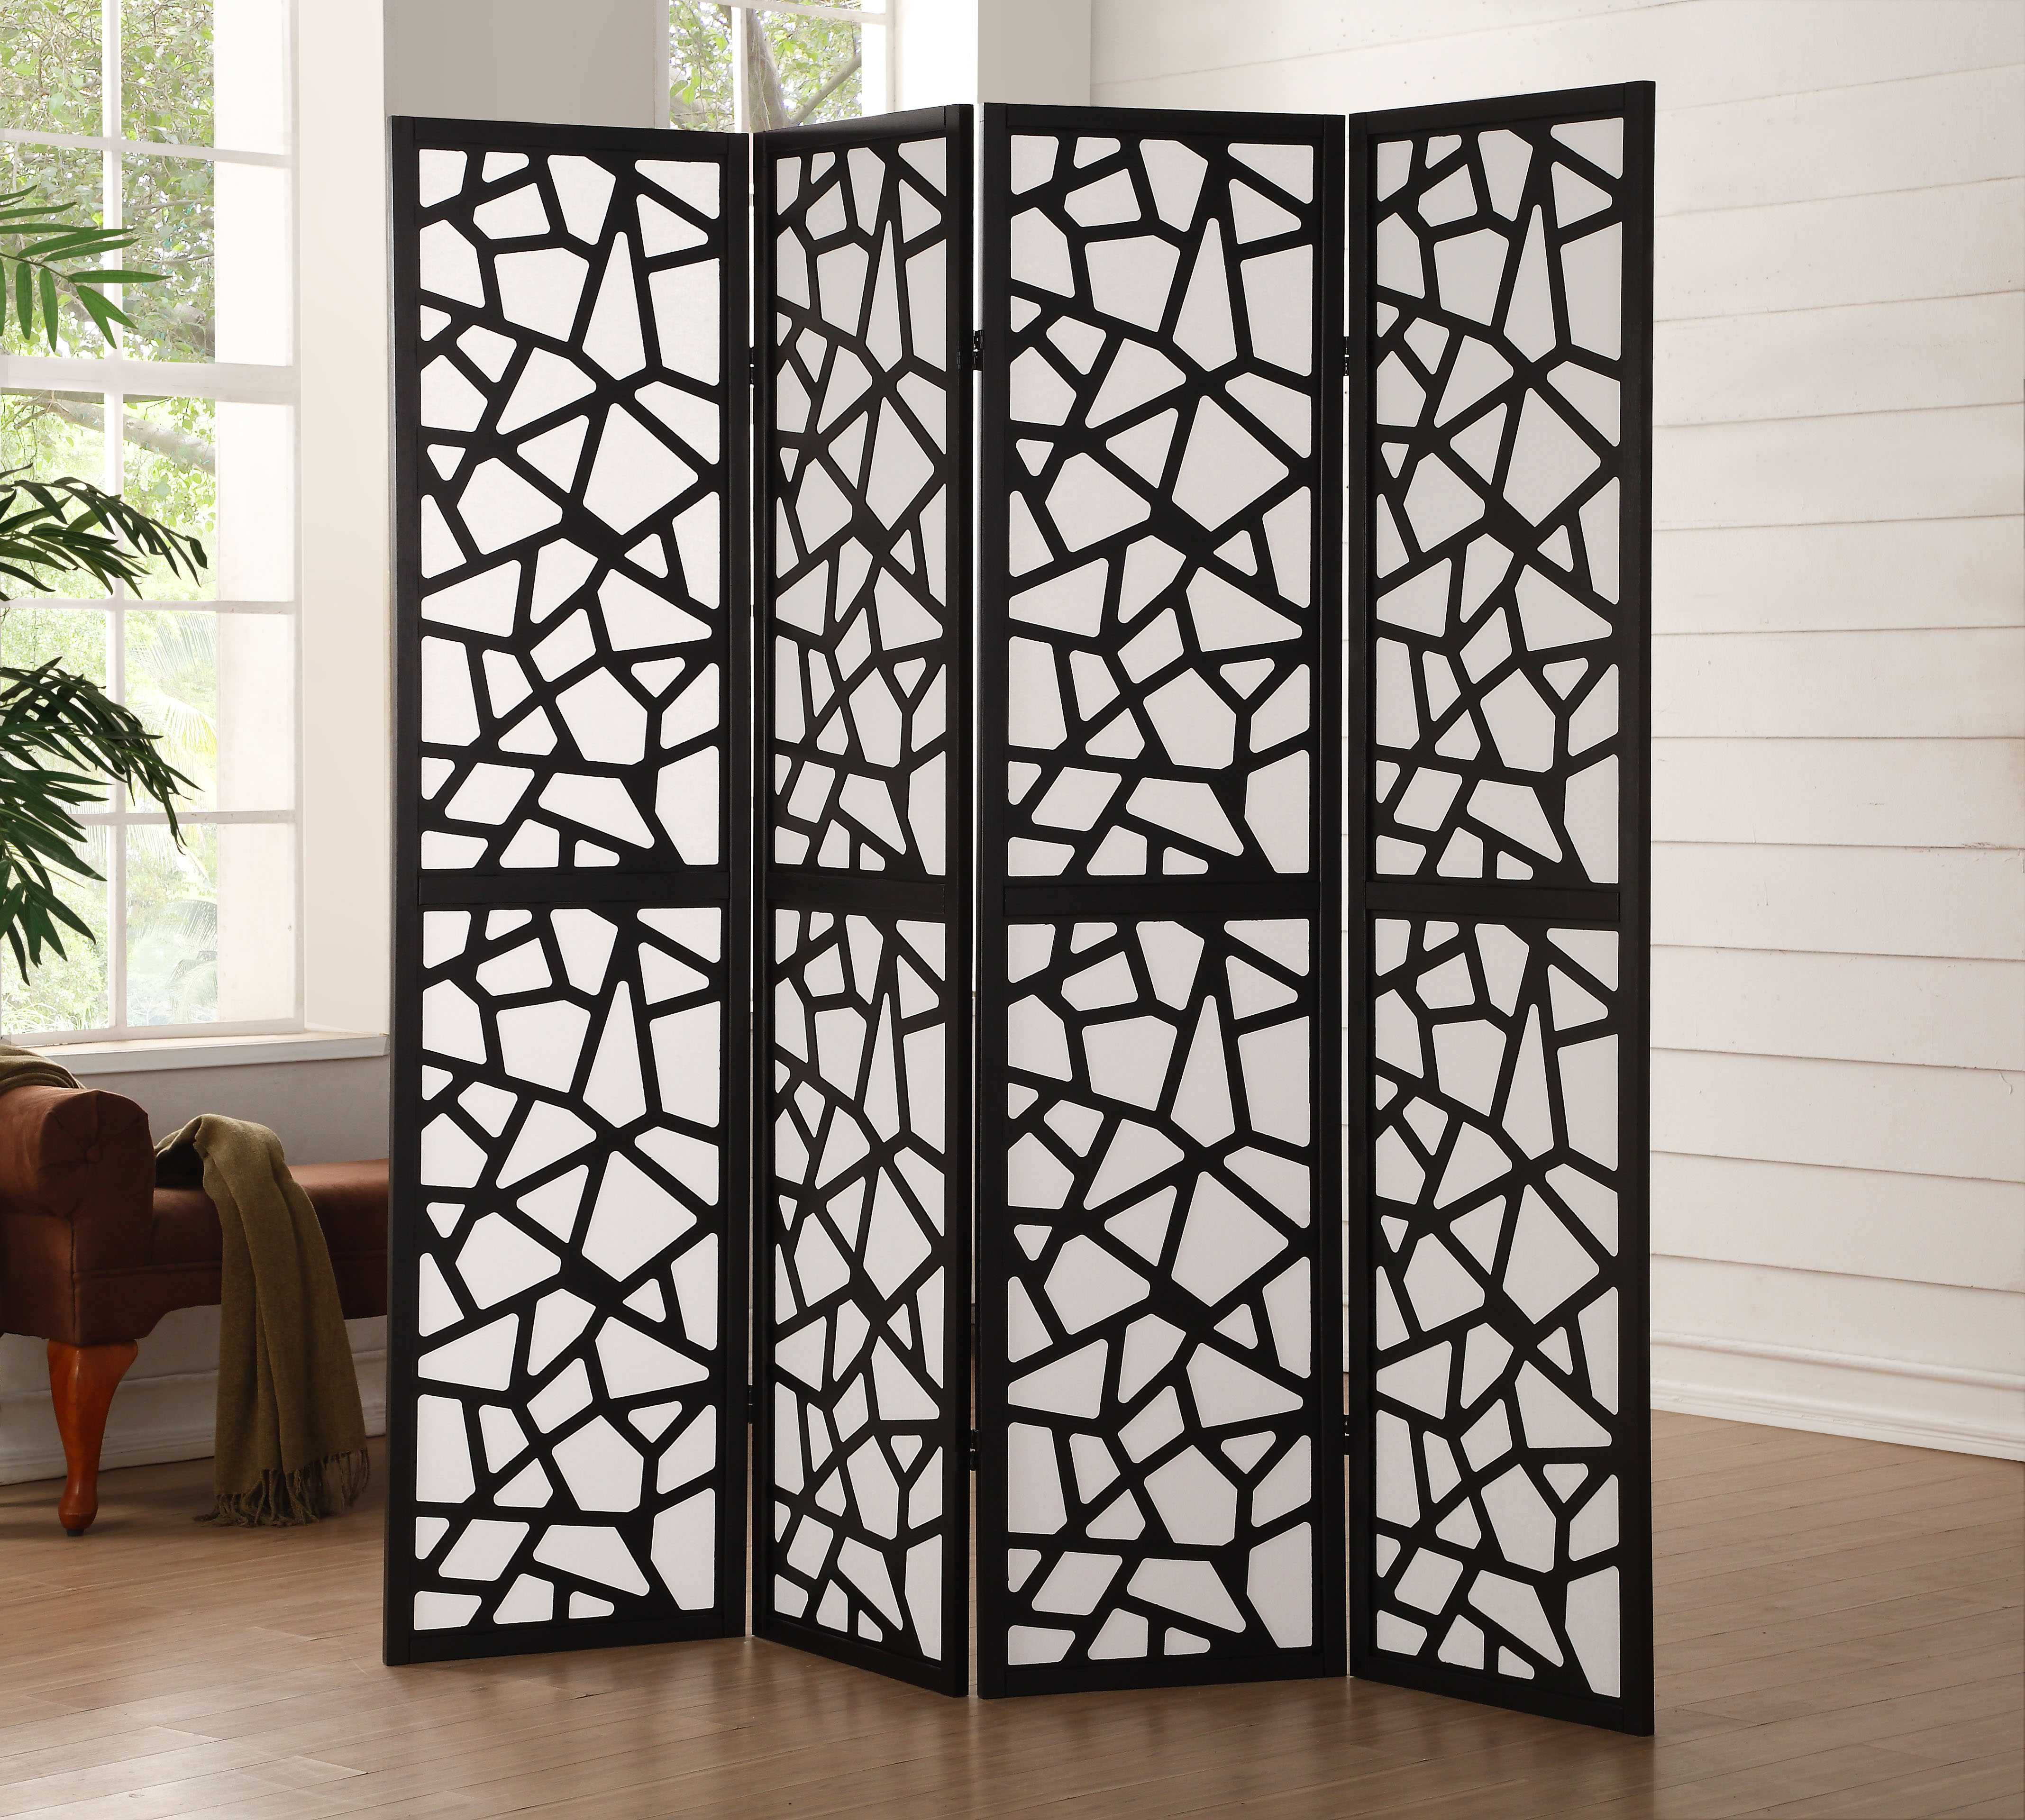 Wood & Fabric 4Panel Screen Room Divider with CutOut Design, Black